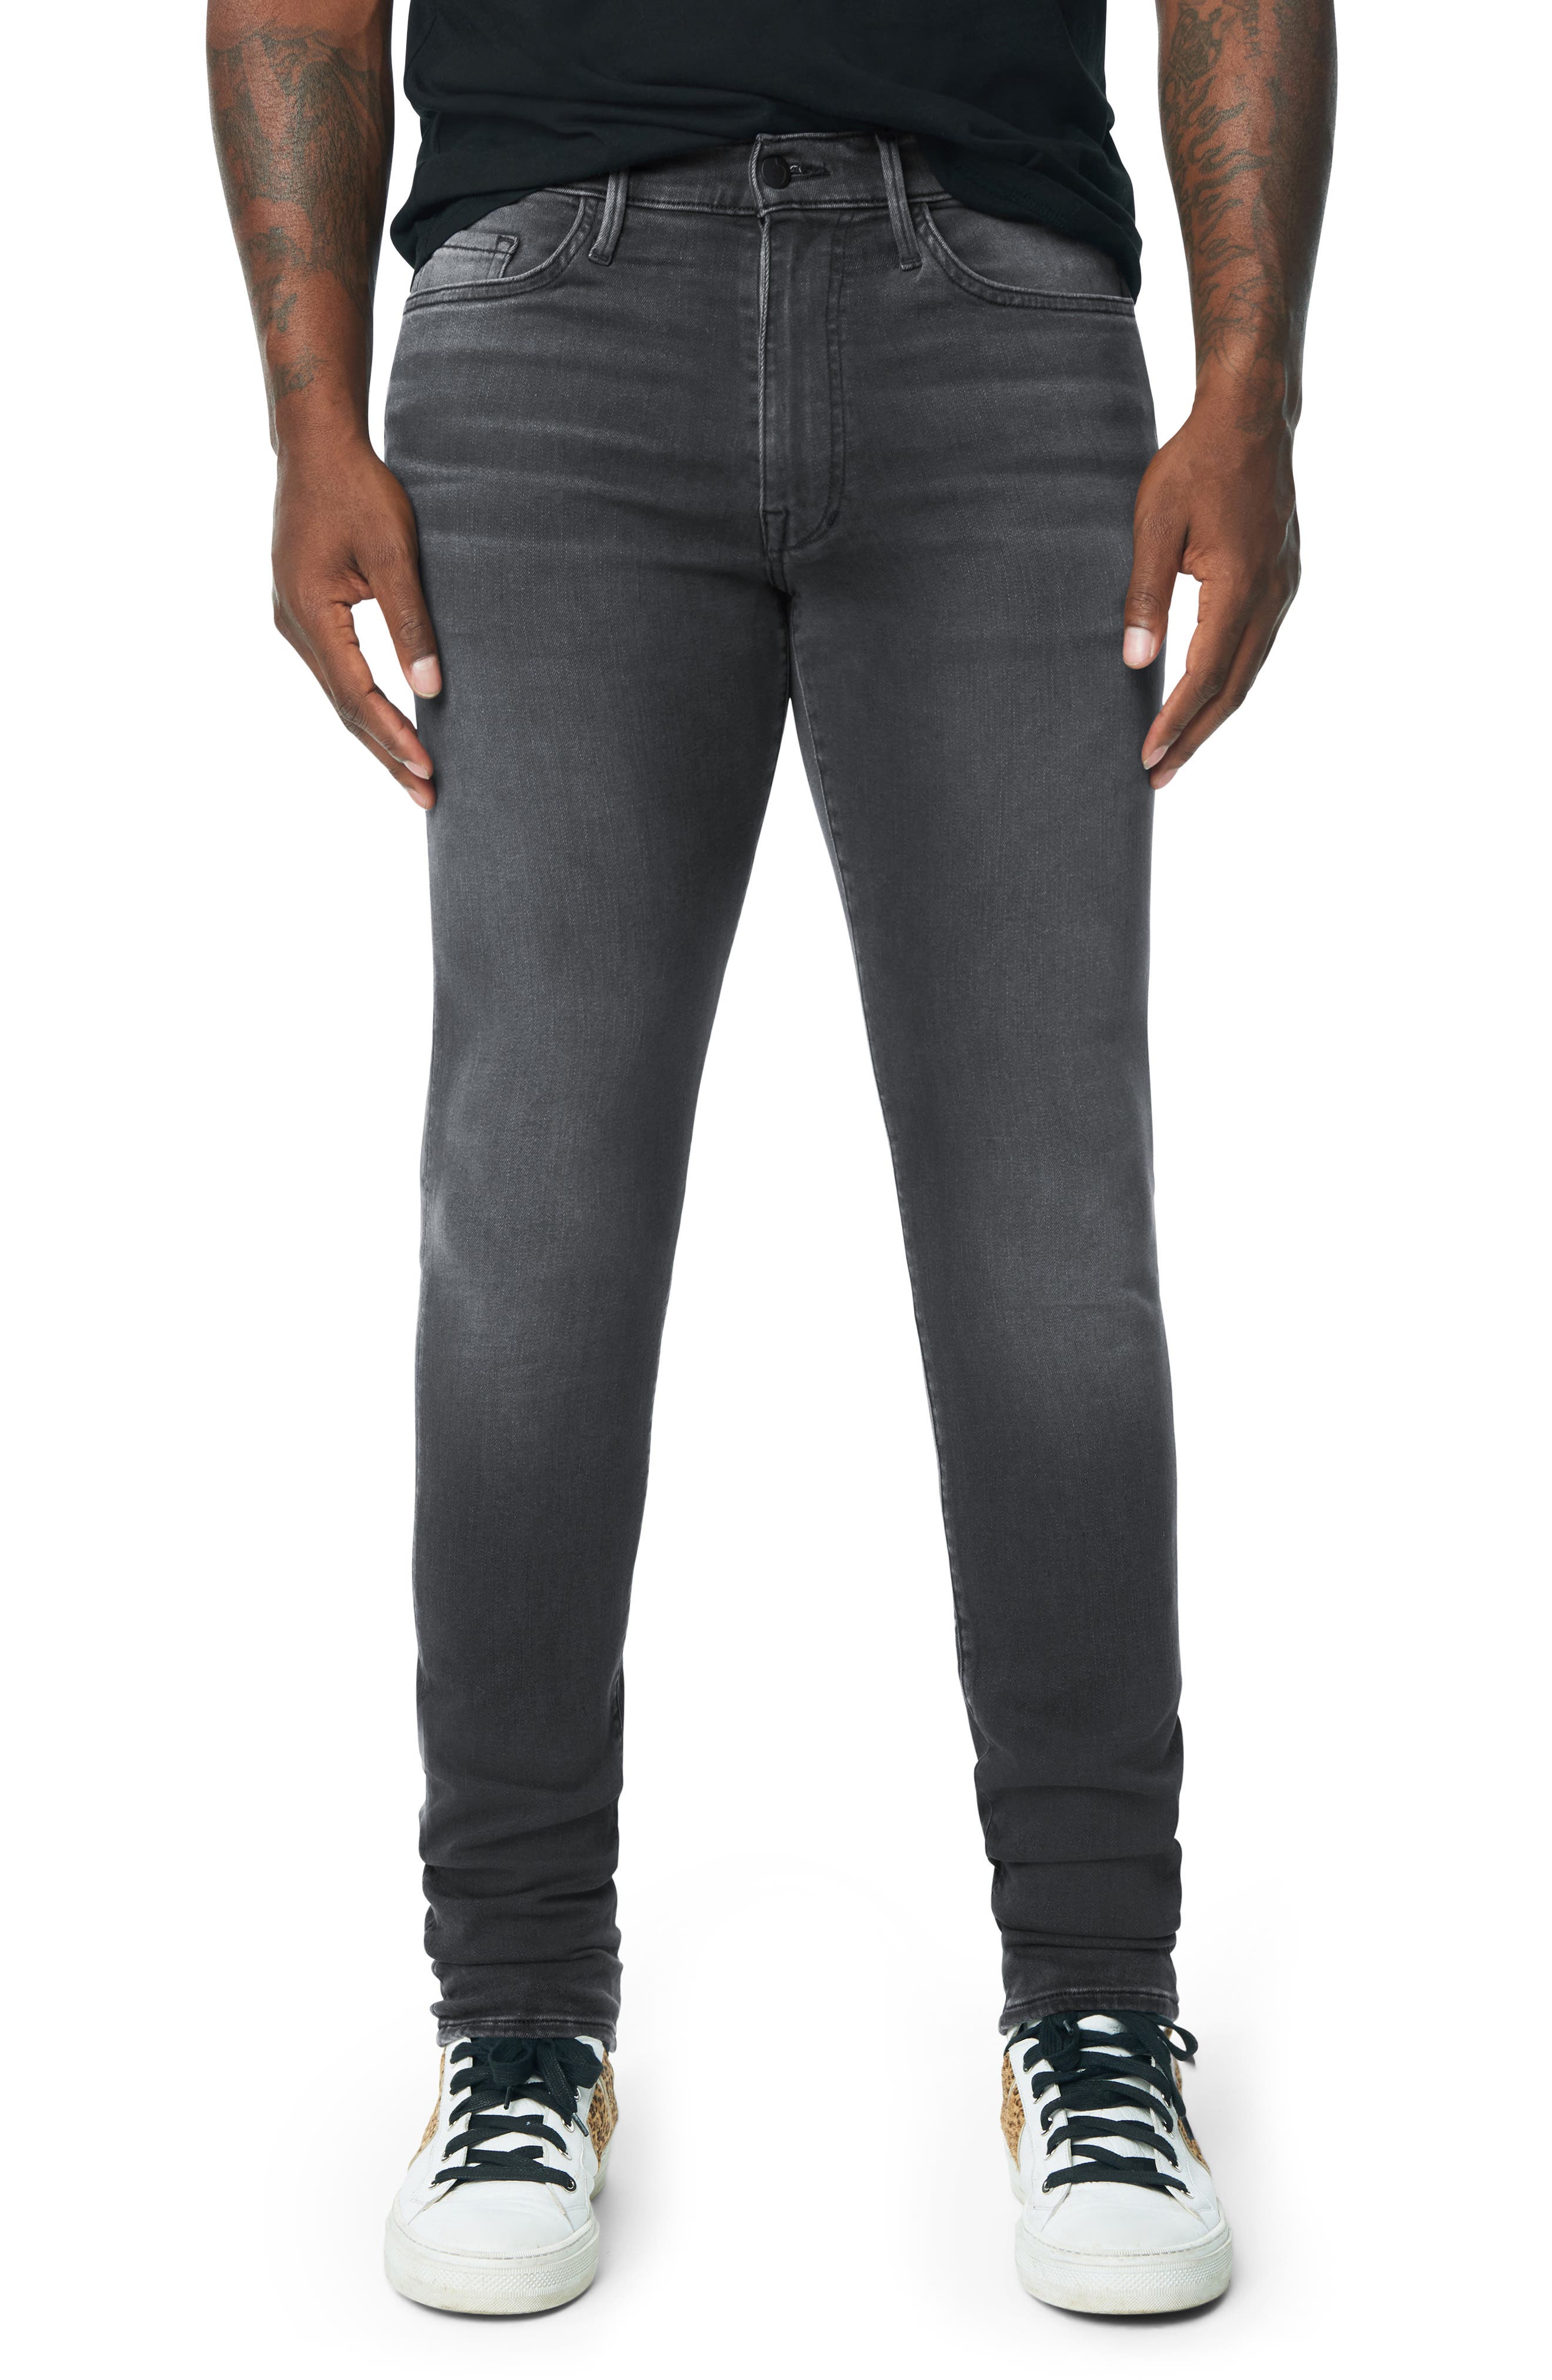 Joes Jeans Mens The Slim Fit Colored Jean